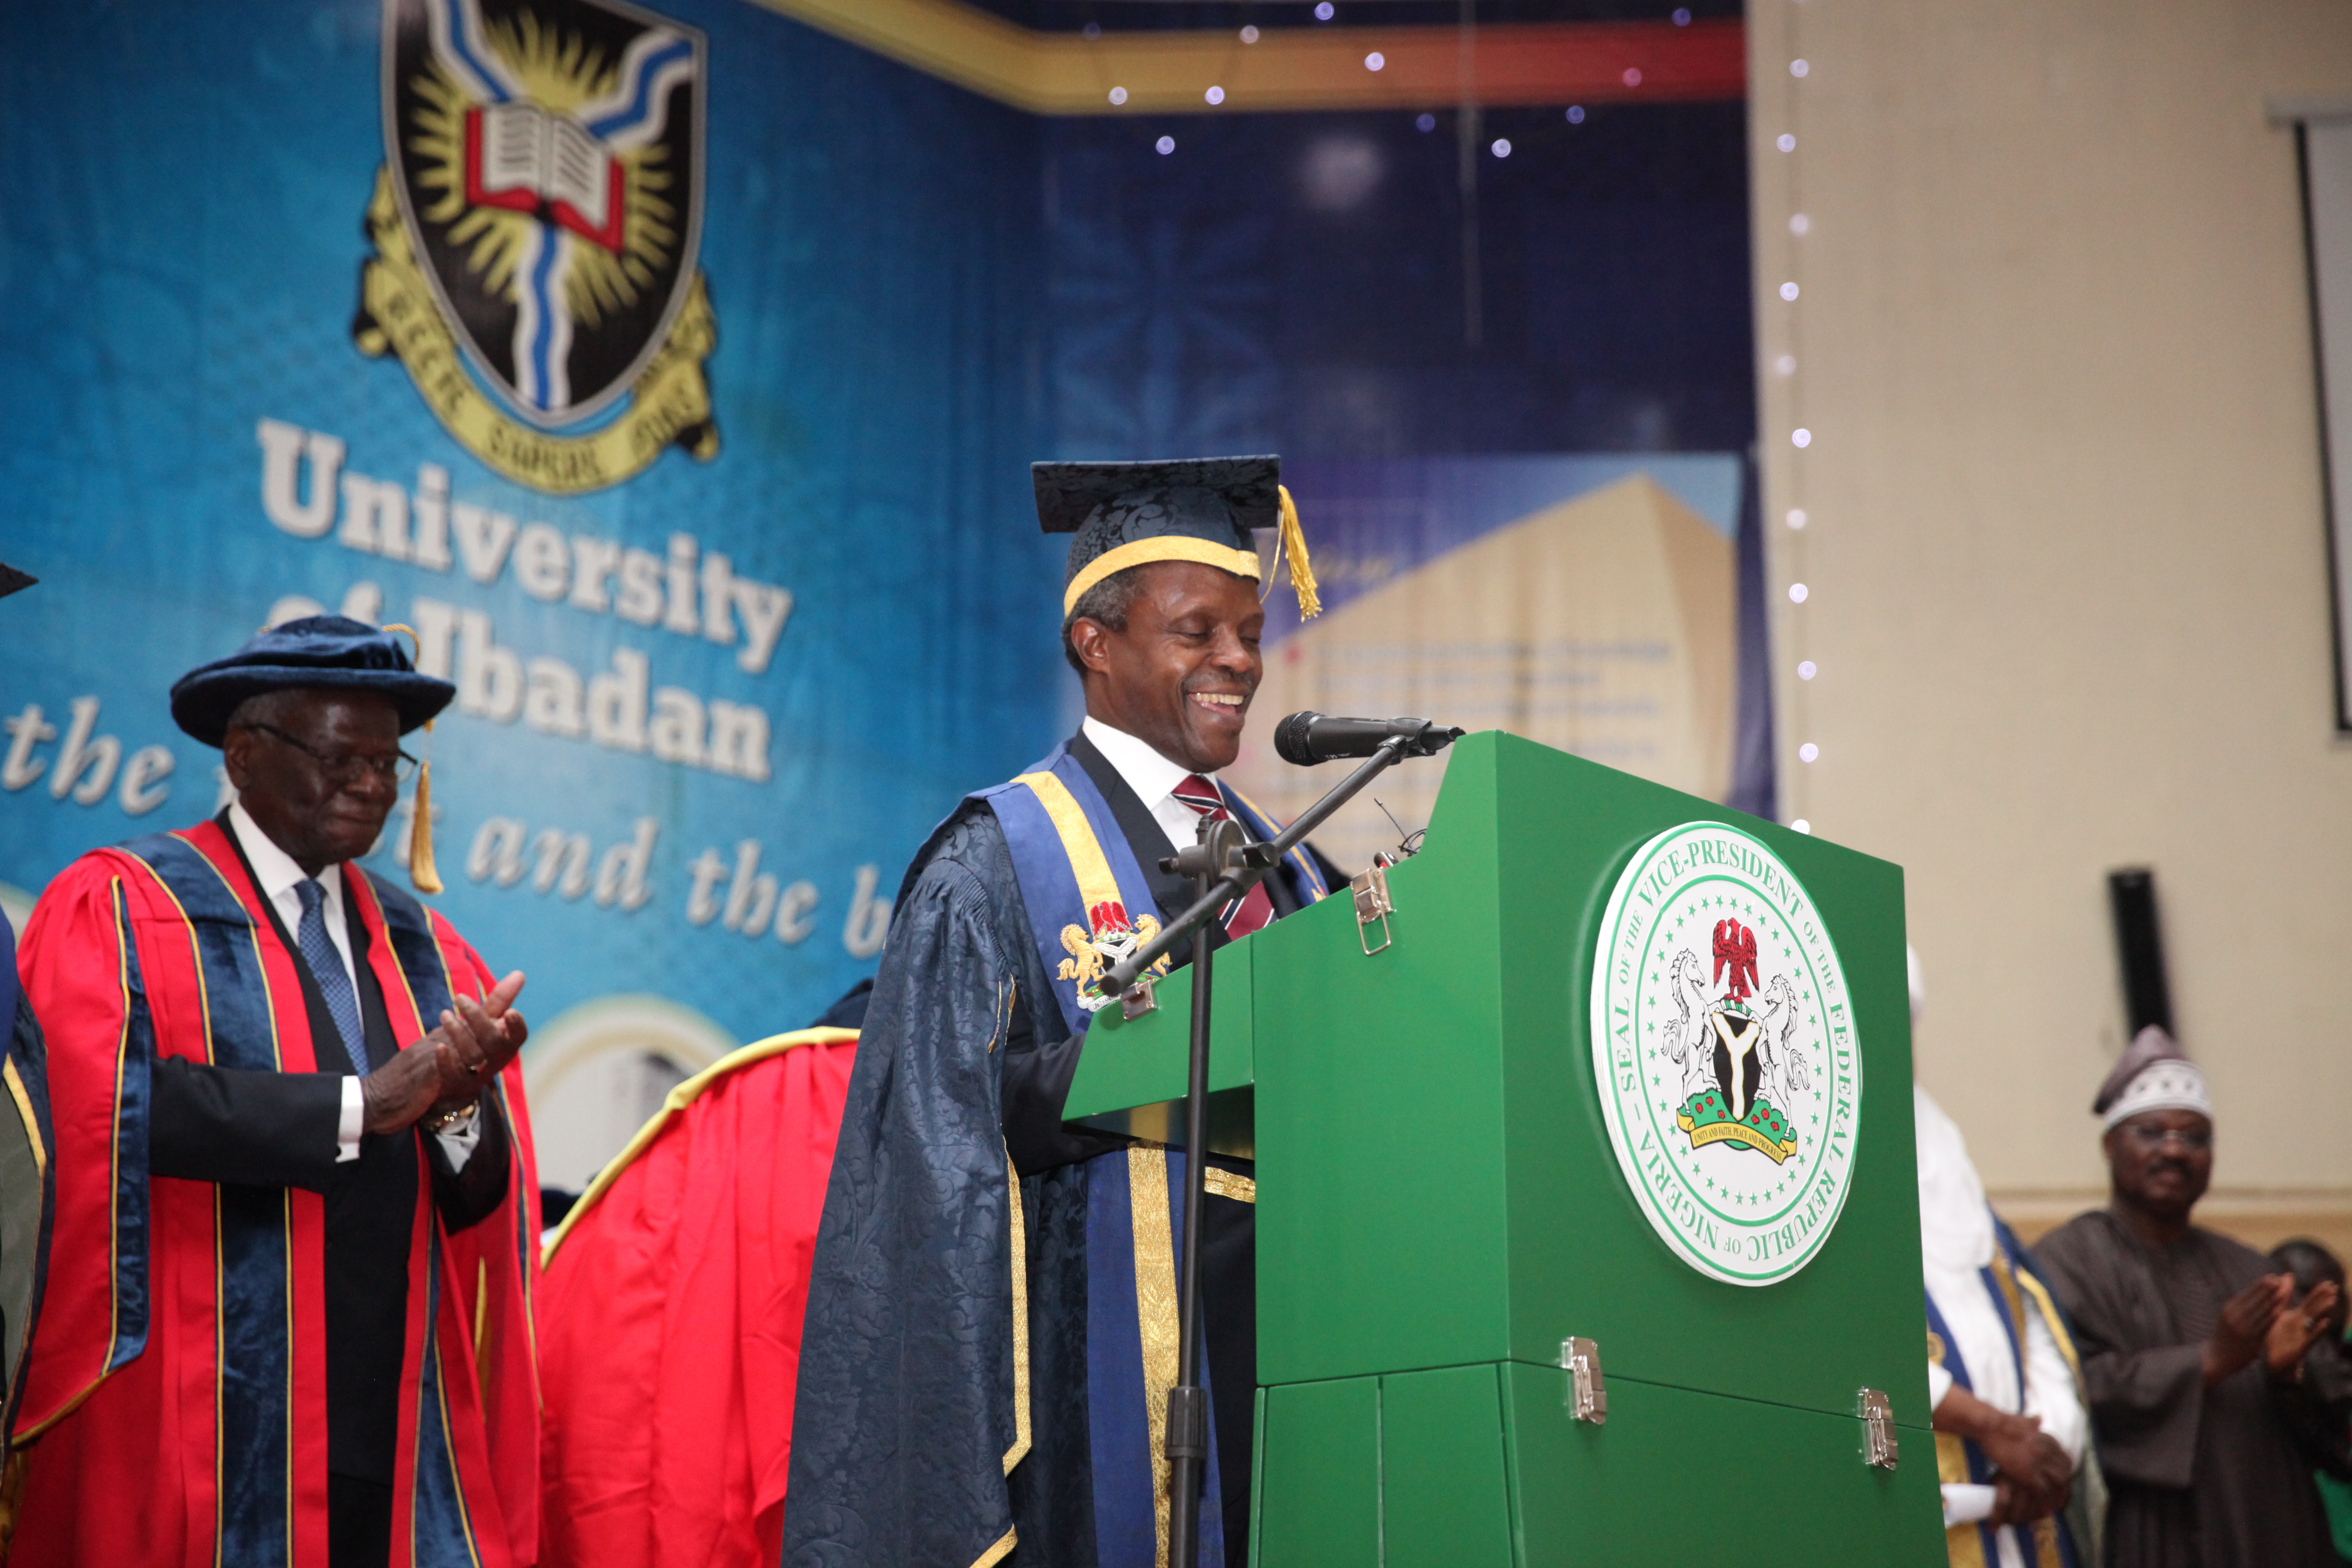 VP Osinbajo At The Installation Of The 7th Chancellor, University Of Ibadan 2015 Convocation Ceremony On 17/11/2015